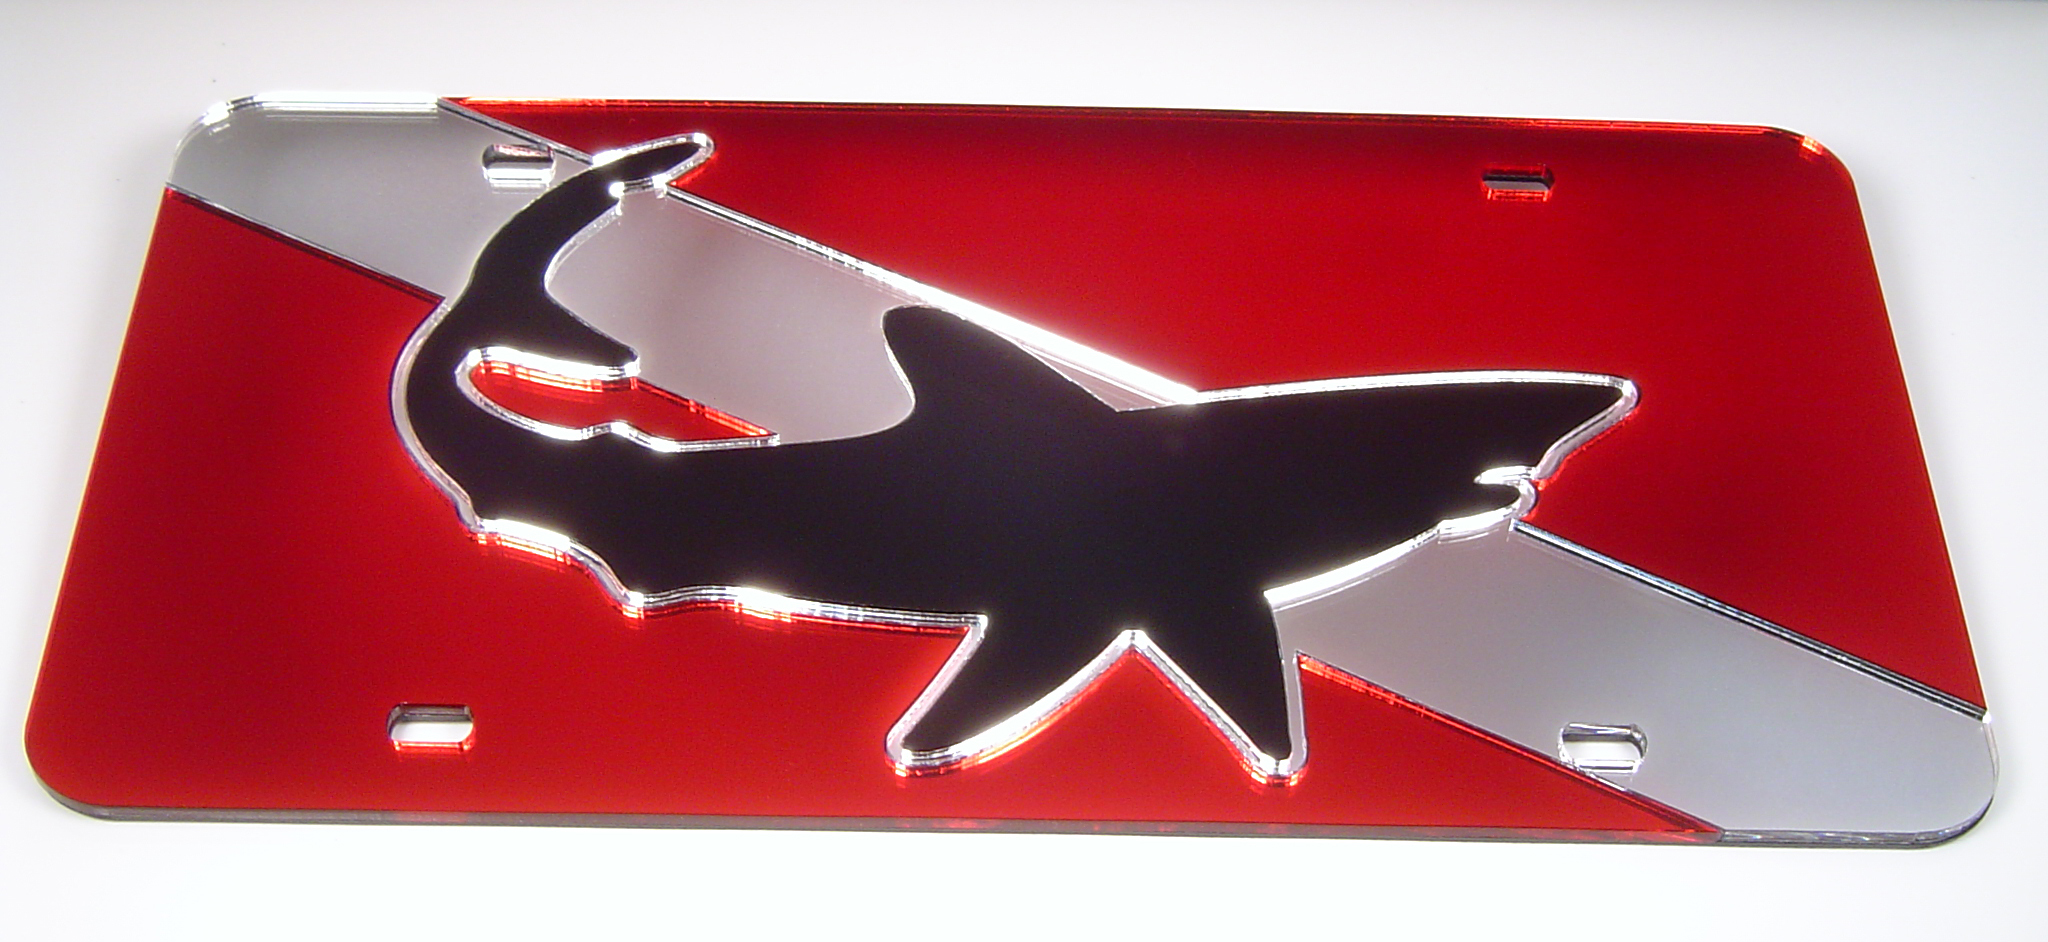 Shark Mirror Dive Flag License Plate Scuba Tag acrylic mirrormade in the USA 